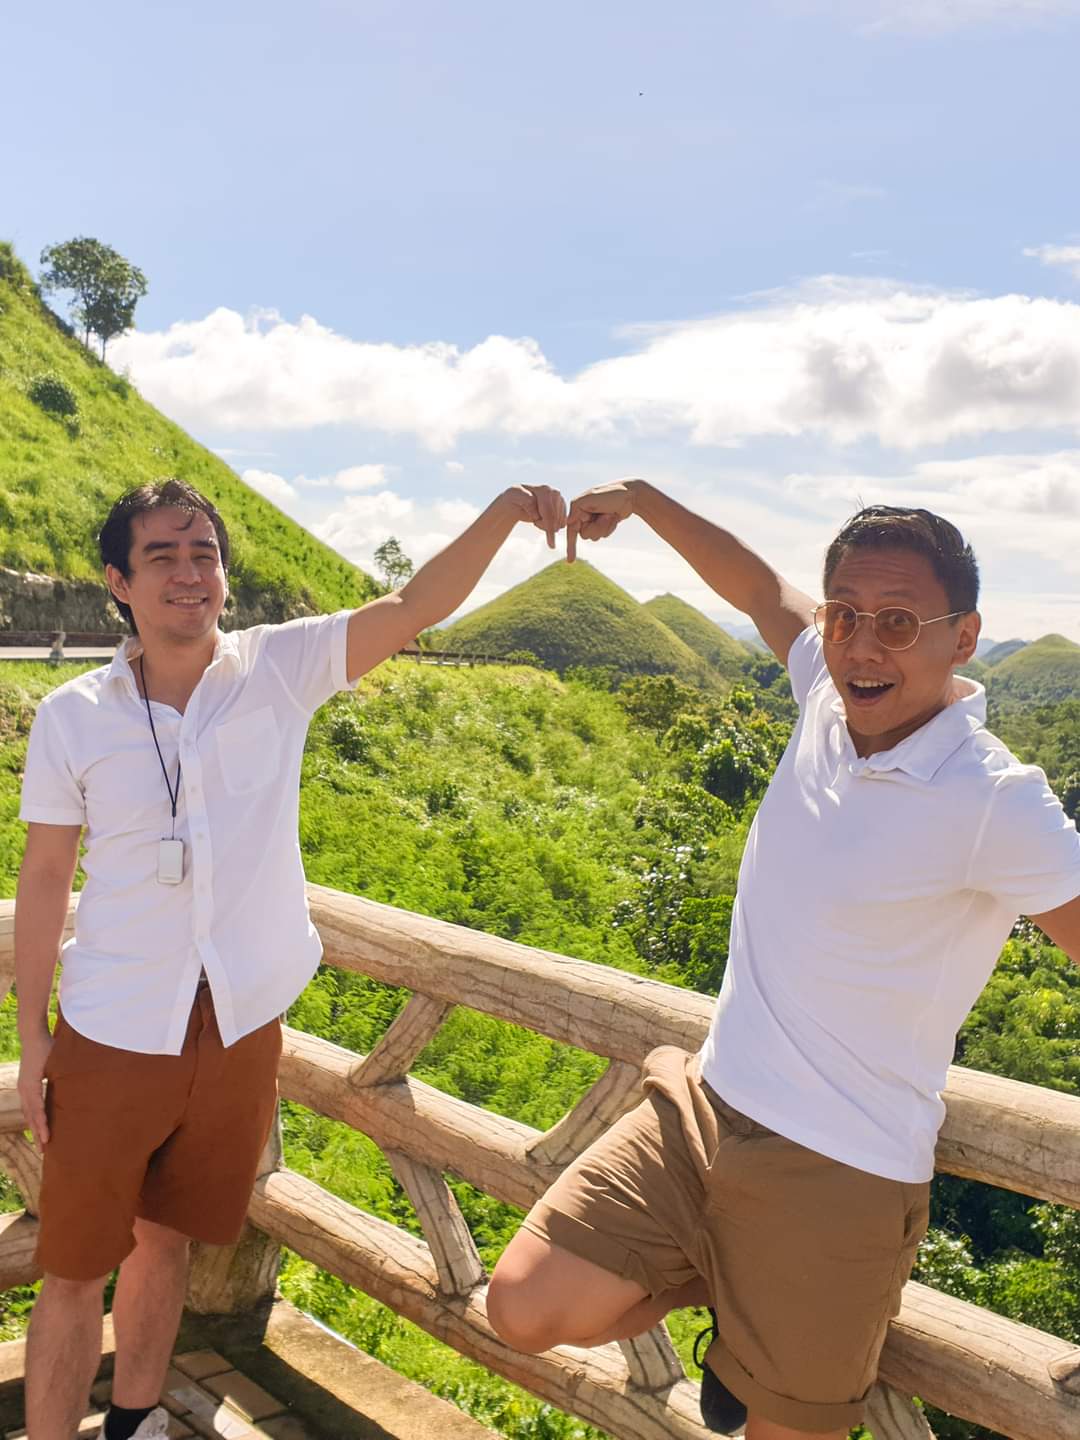 Mikey Bustos on Chocolate Hills: ‘A geological wonder’